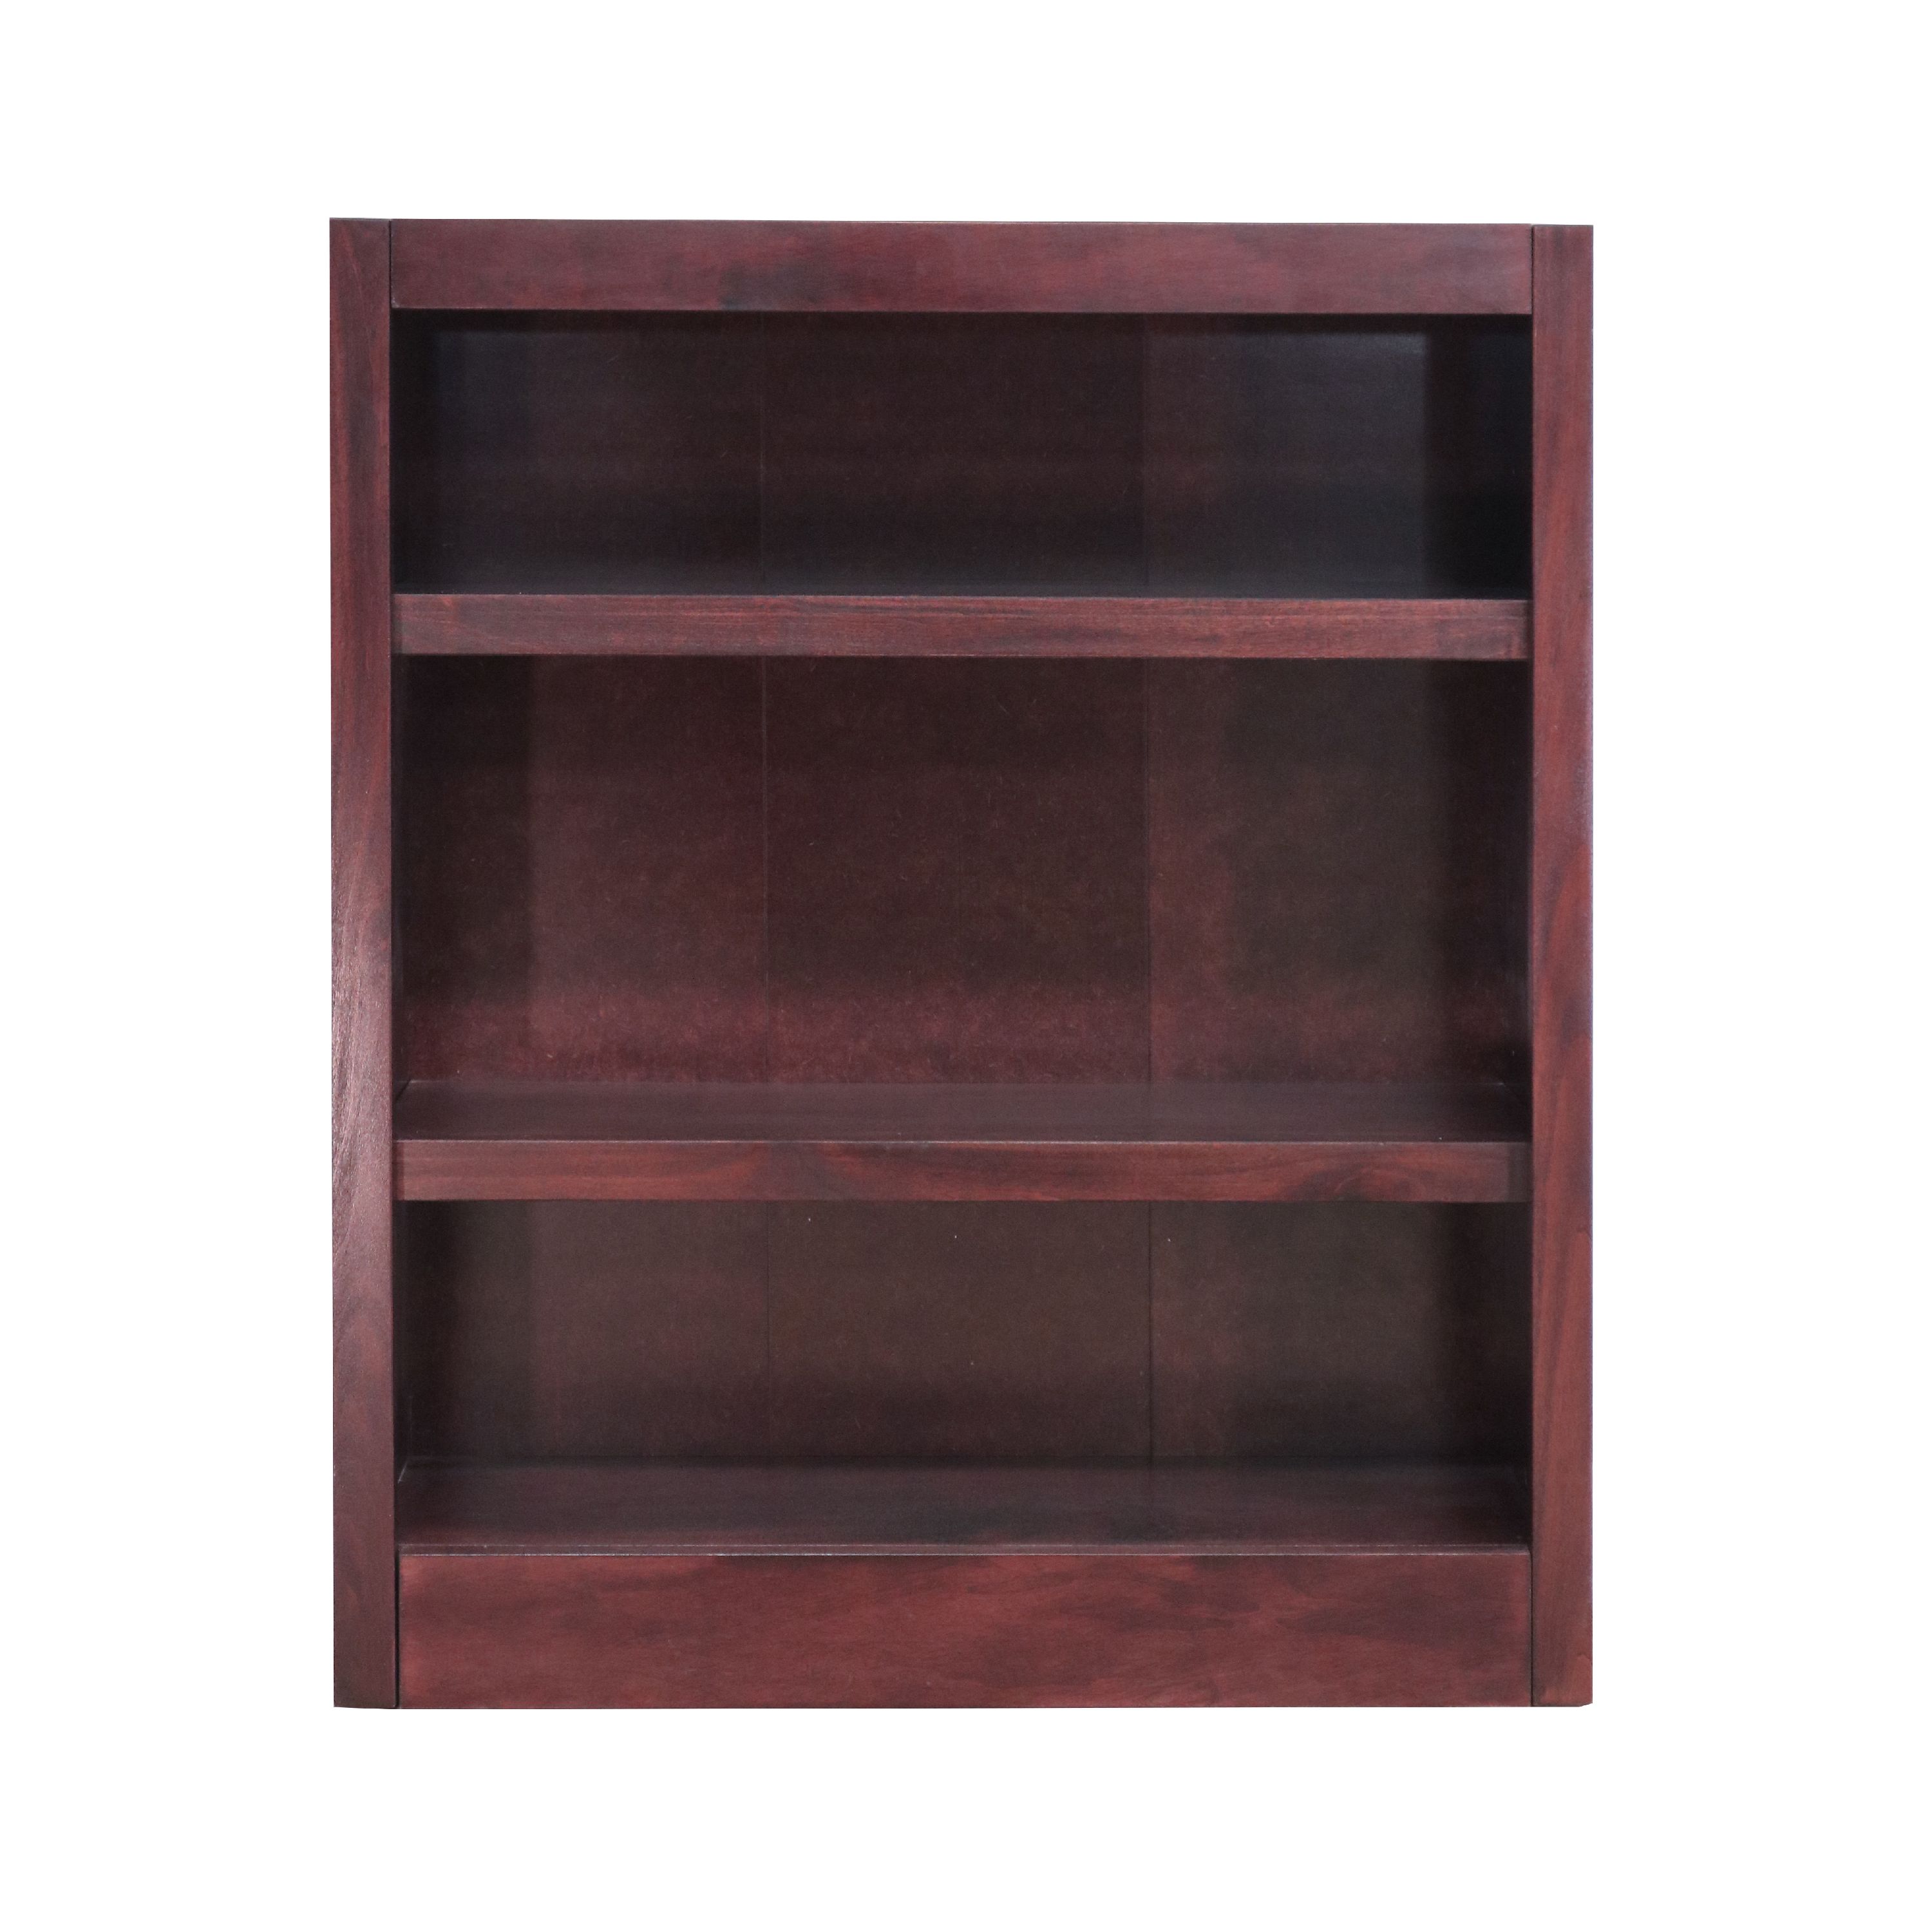 Concepts in Wood 3 Shelf Wood Bookcase, 36 inch Tall - Cherry Finish - image 5 of 6